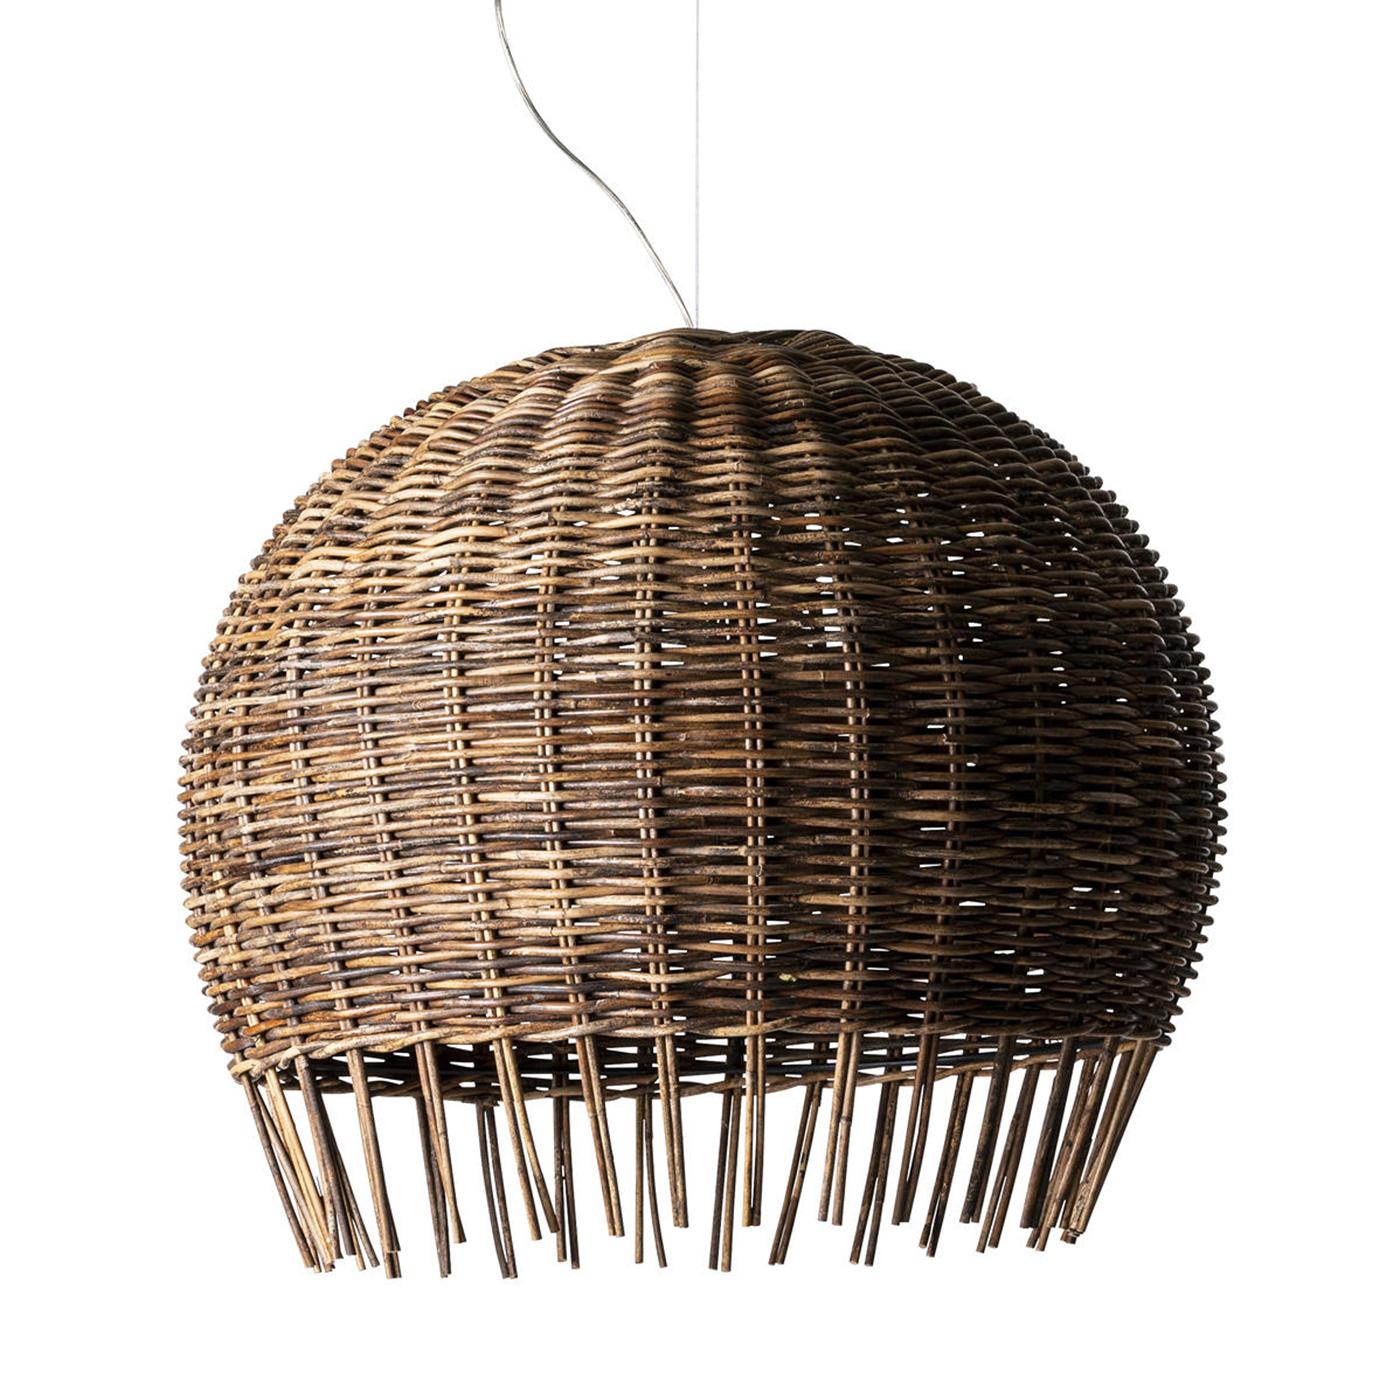 Suspension Luma medium in natural handwoven
rattan. With 1 bulb, lamp holder type E27. Max.
power 20 W, 220 Volt, bulb not included. With
electrical cable lenght 200 cm; steel cable lenght 
200 cm, adjustable height.